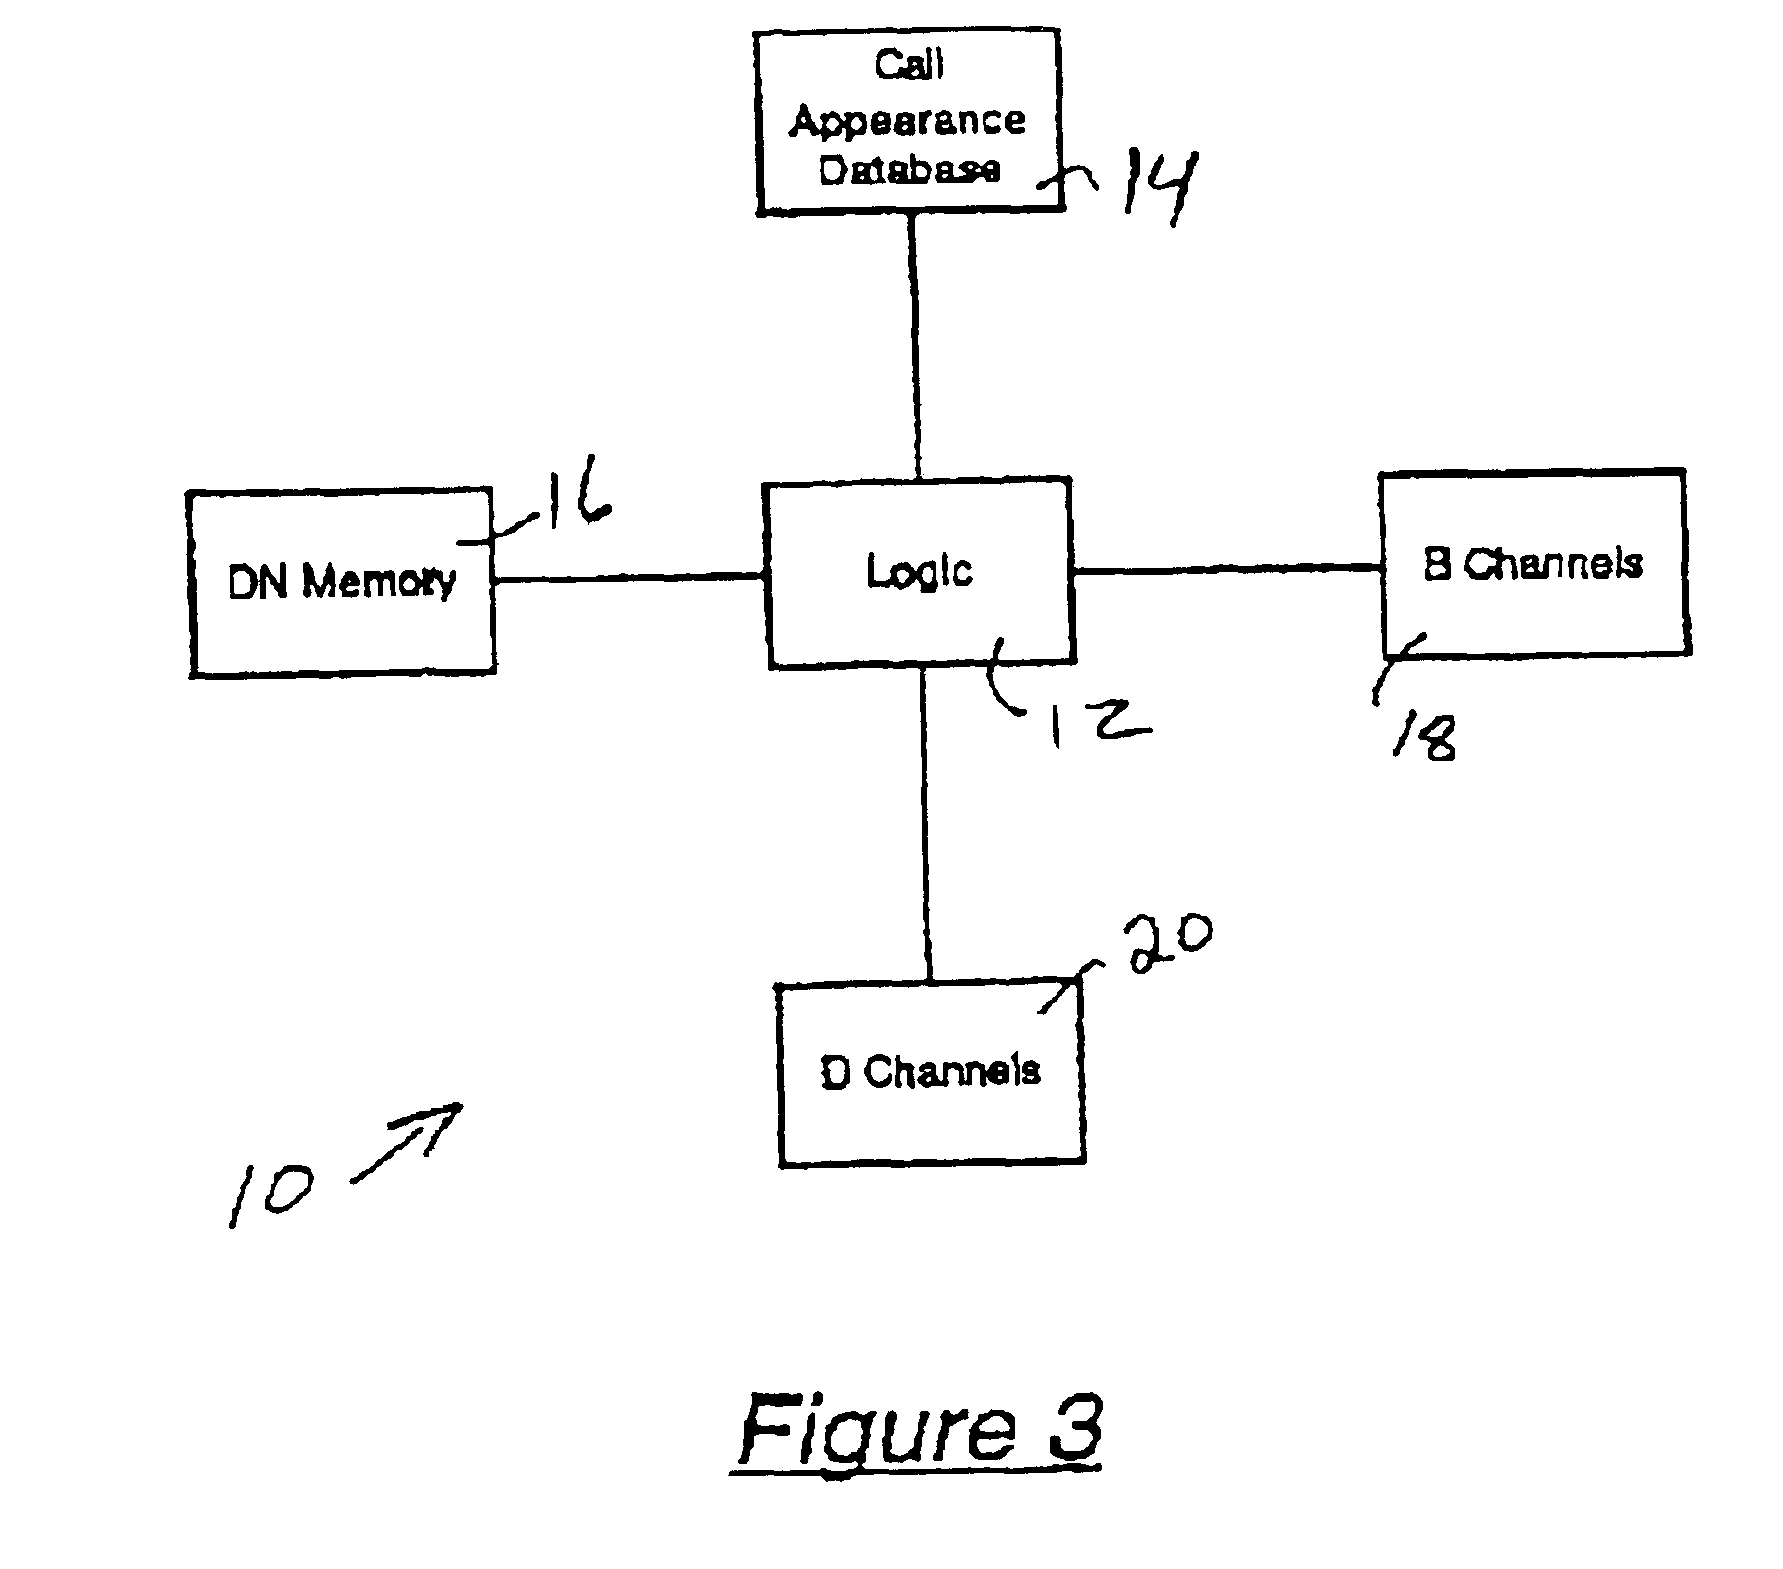 PBX switch incorporating methods and apparatus for automatically detecting call appearance values for each primary directory number on a basic rate interface